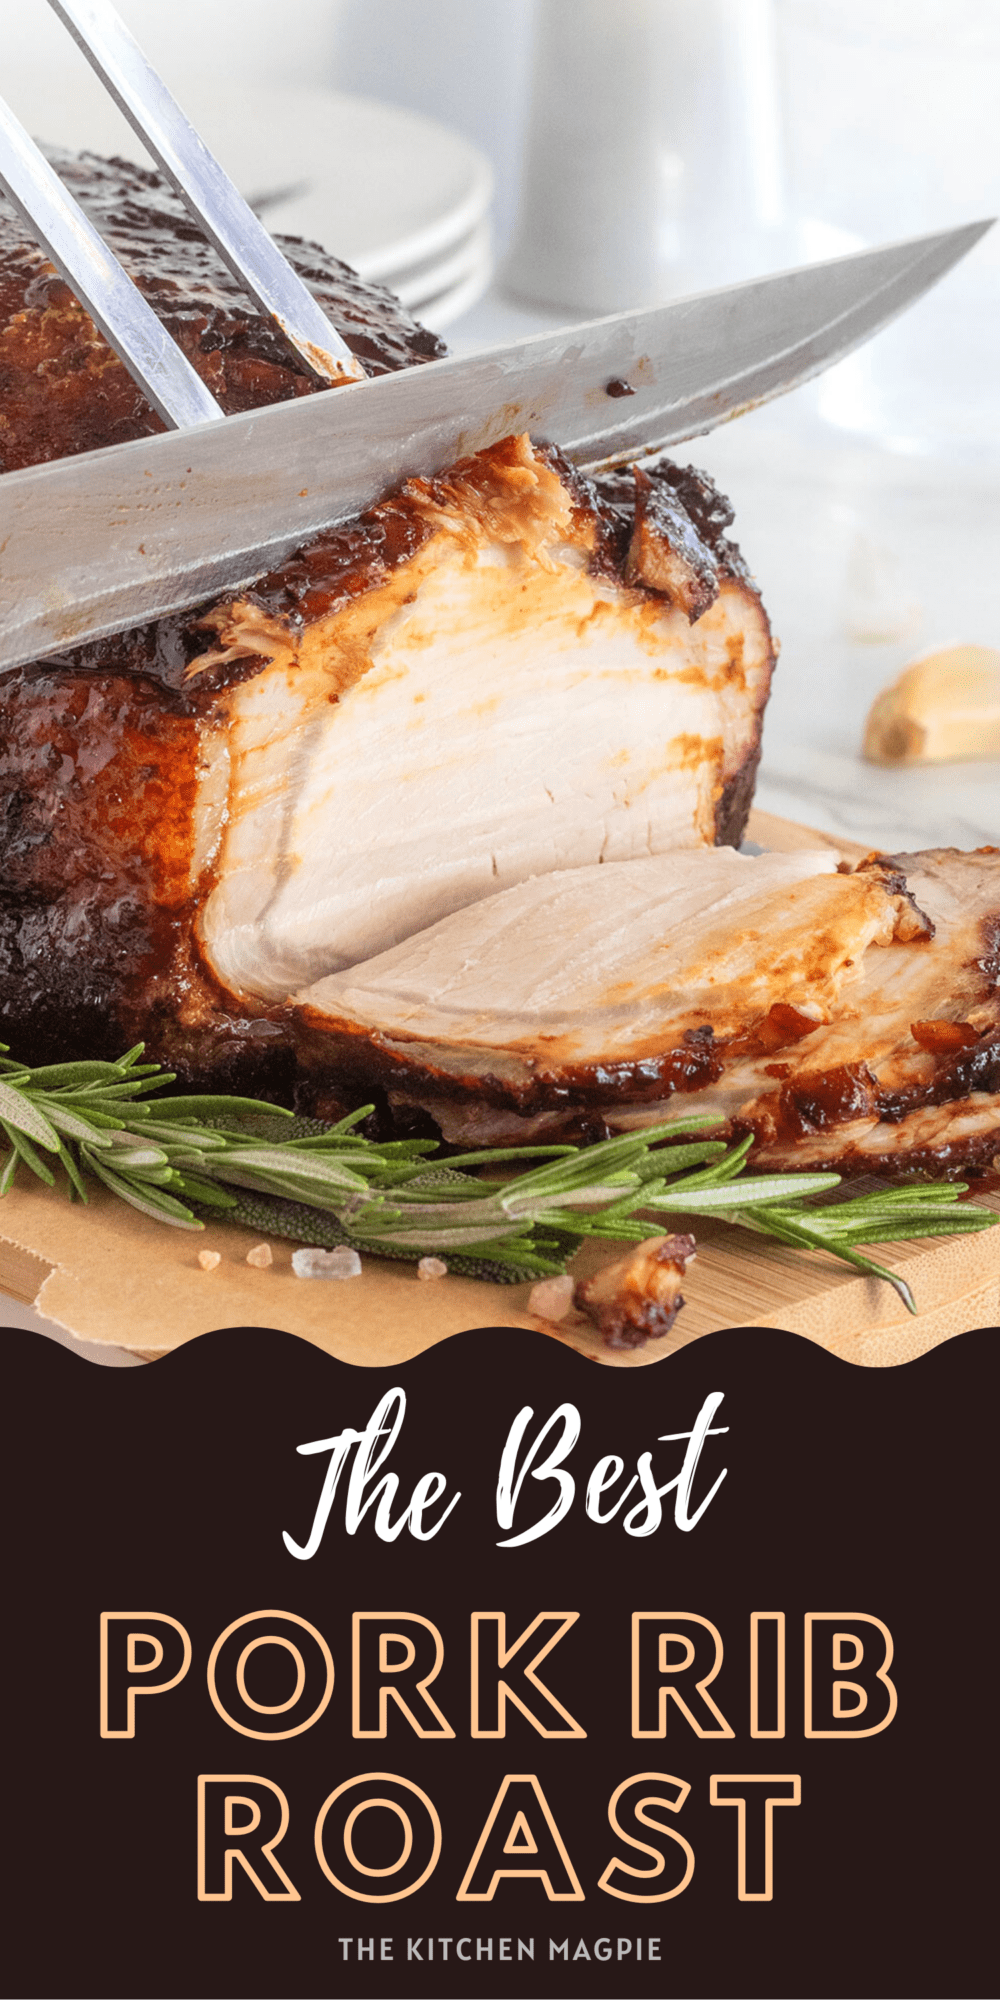 Pork rib roast is cooked to tender perfection and glazed with a sweet and spice glaze. Perfect for Sunday dinner!